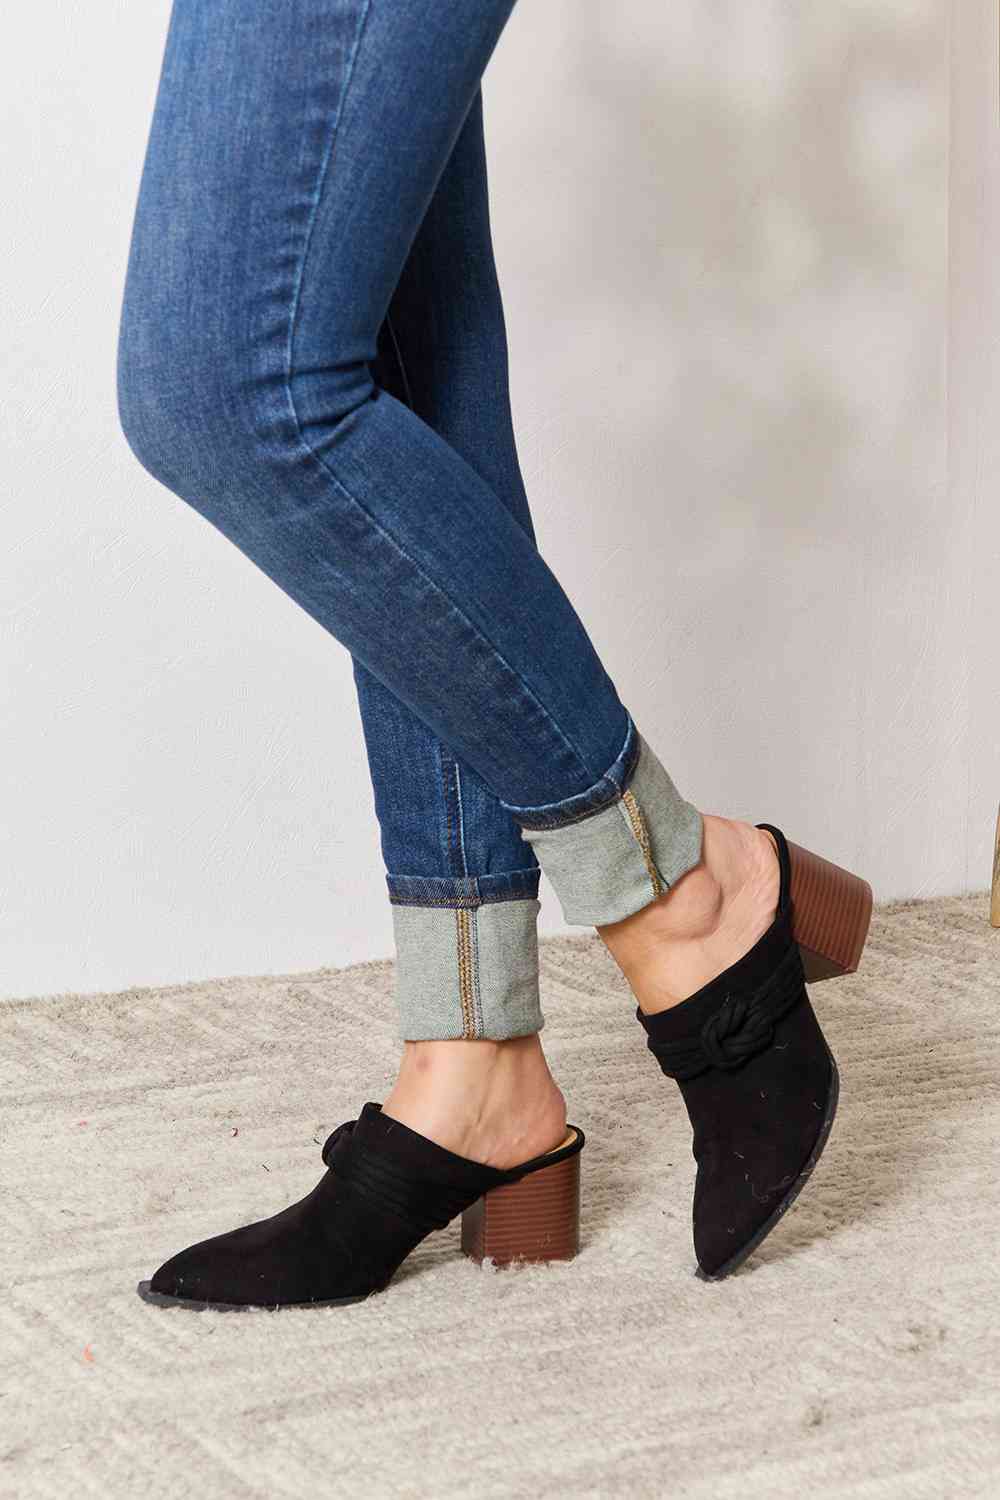 Pointed-Toe Braided Trim Mules